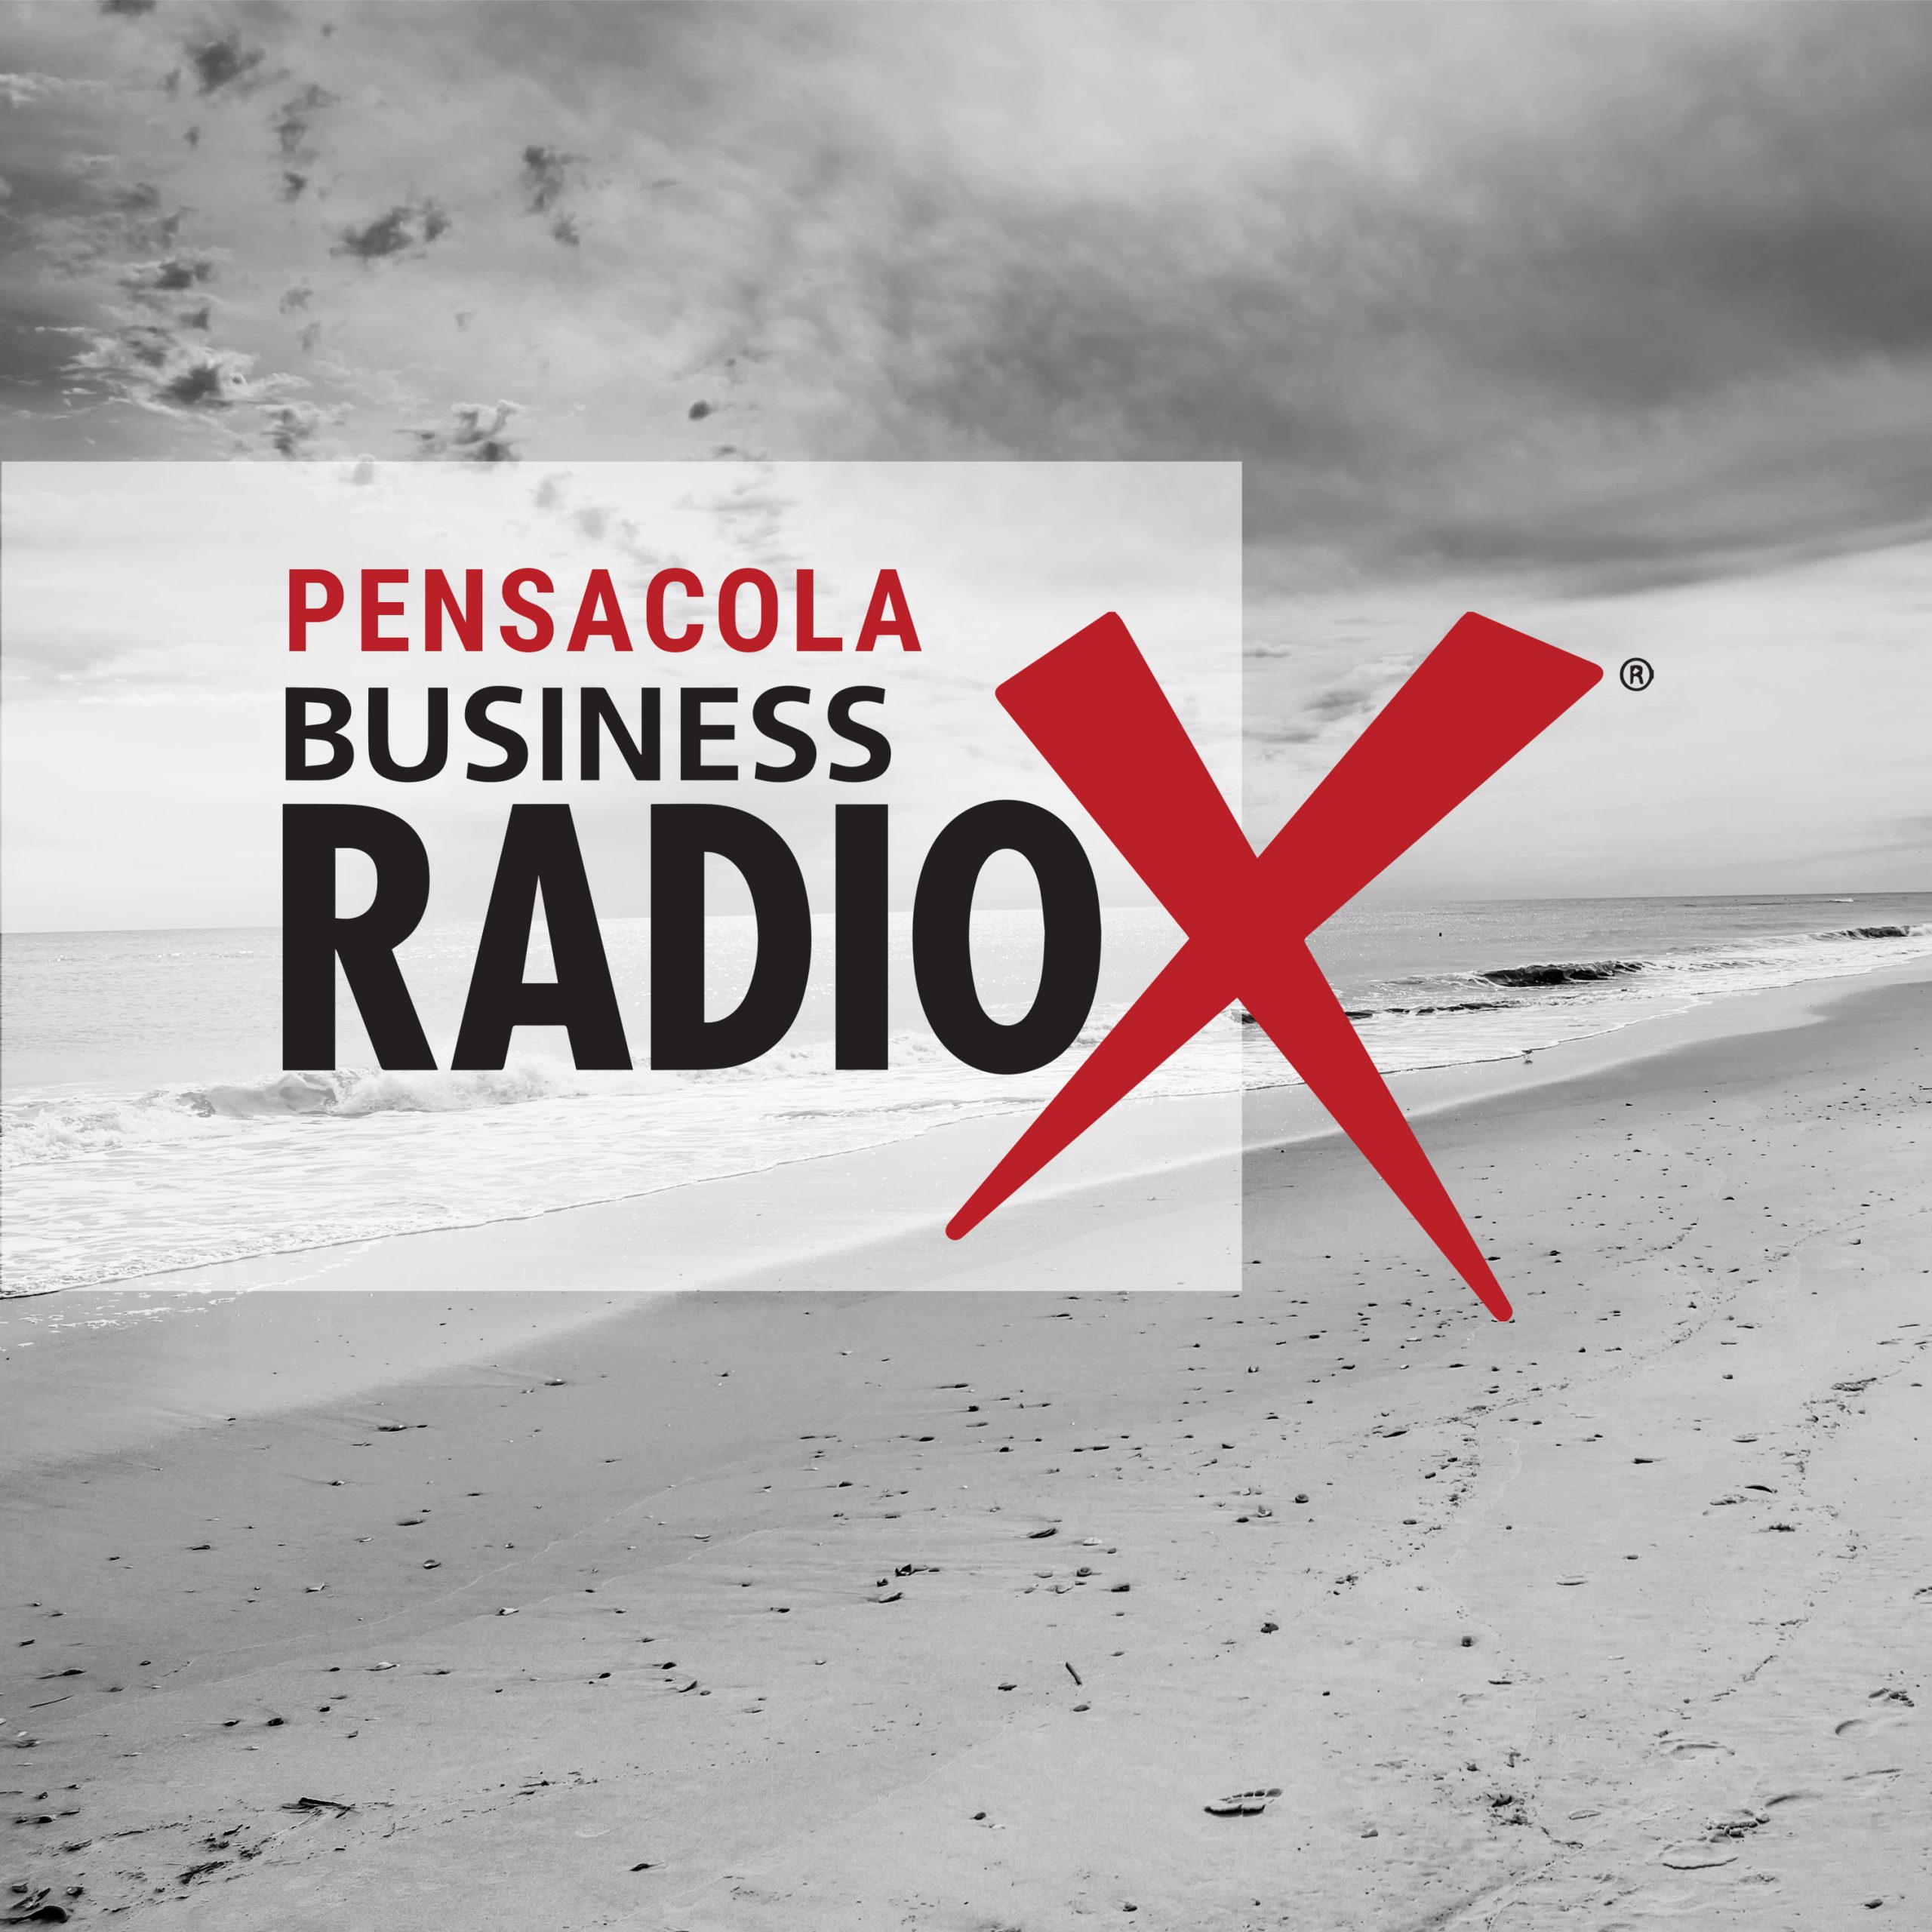 Pensacola Business Radio 02.09.16- Guests: Andrea  Krieger / United Way of Escambia County, Kelly Massey and Gerry Goldstein / SBDC